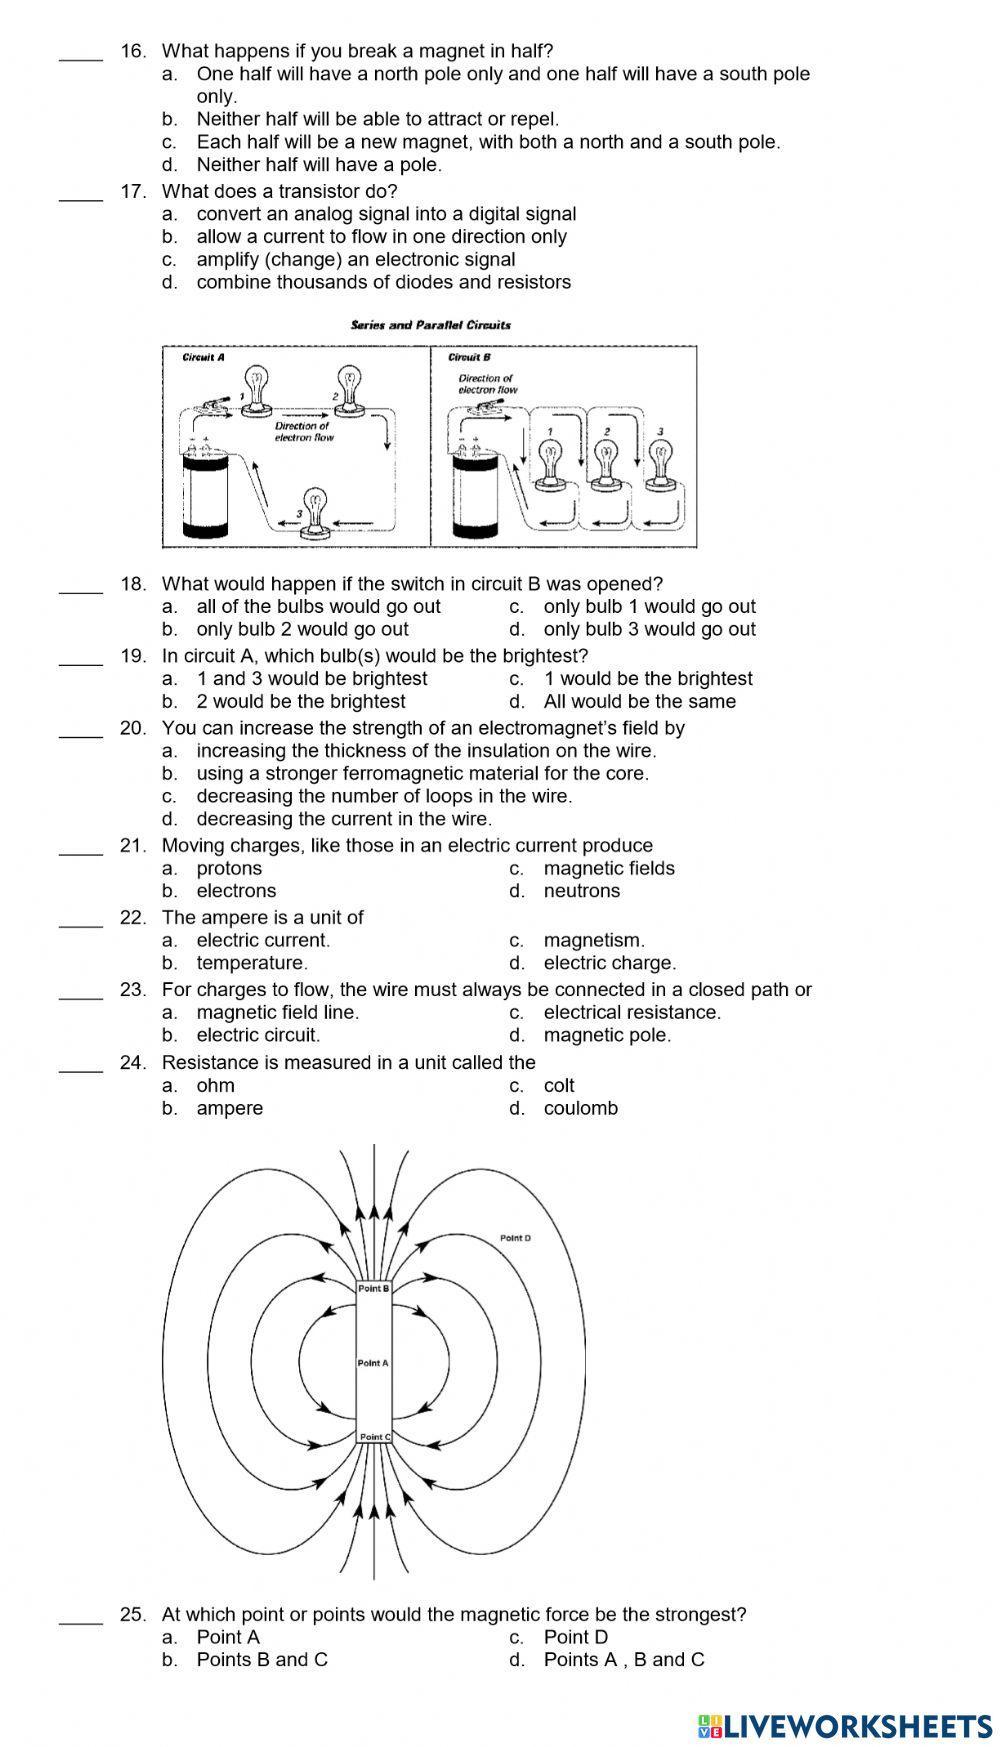 PS-17-15-Electricity and Magnetism Study Guide page 3